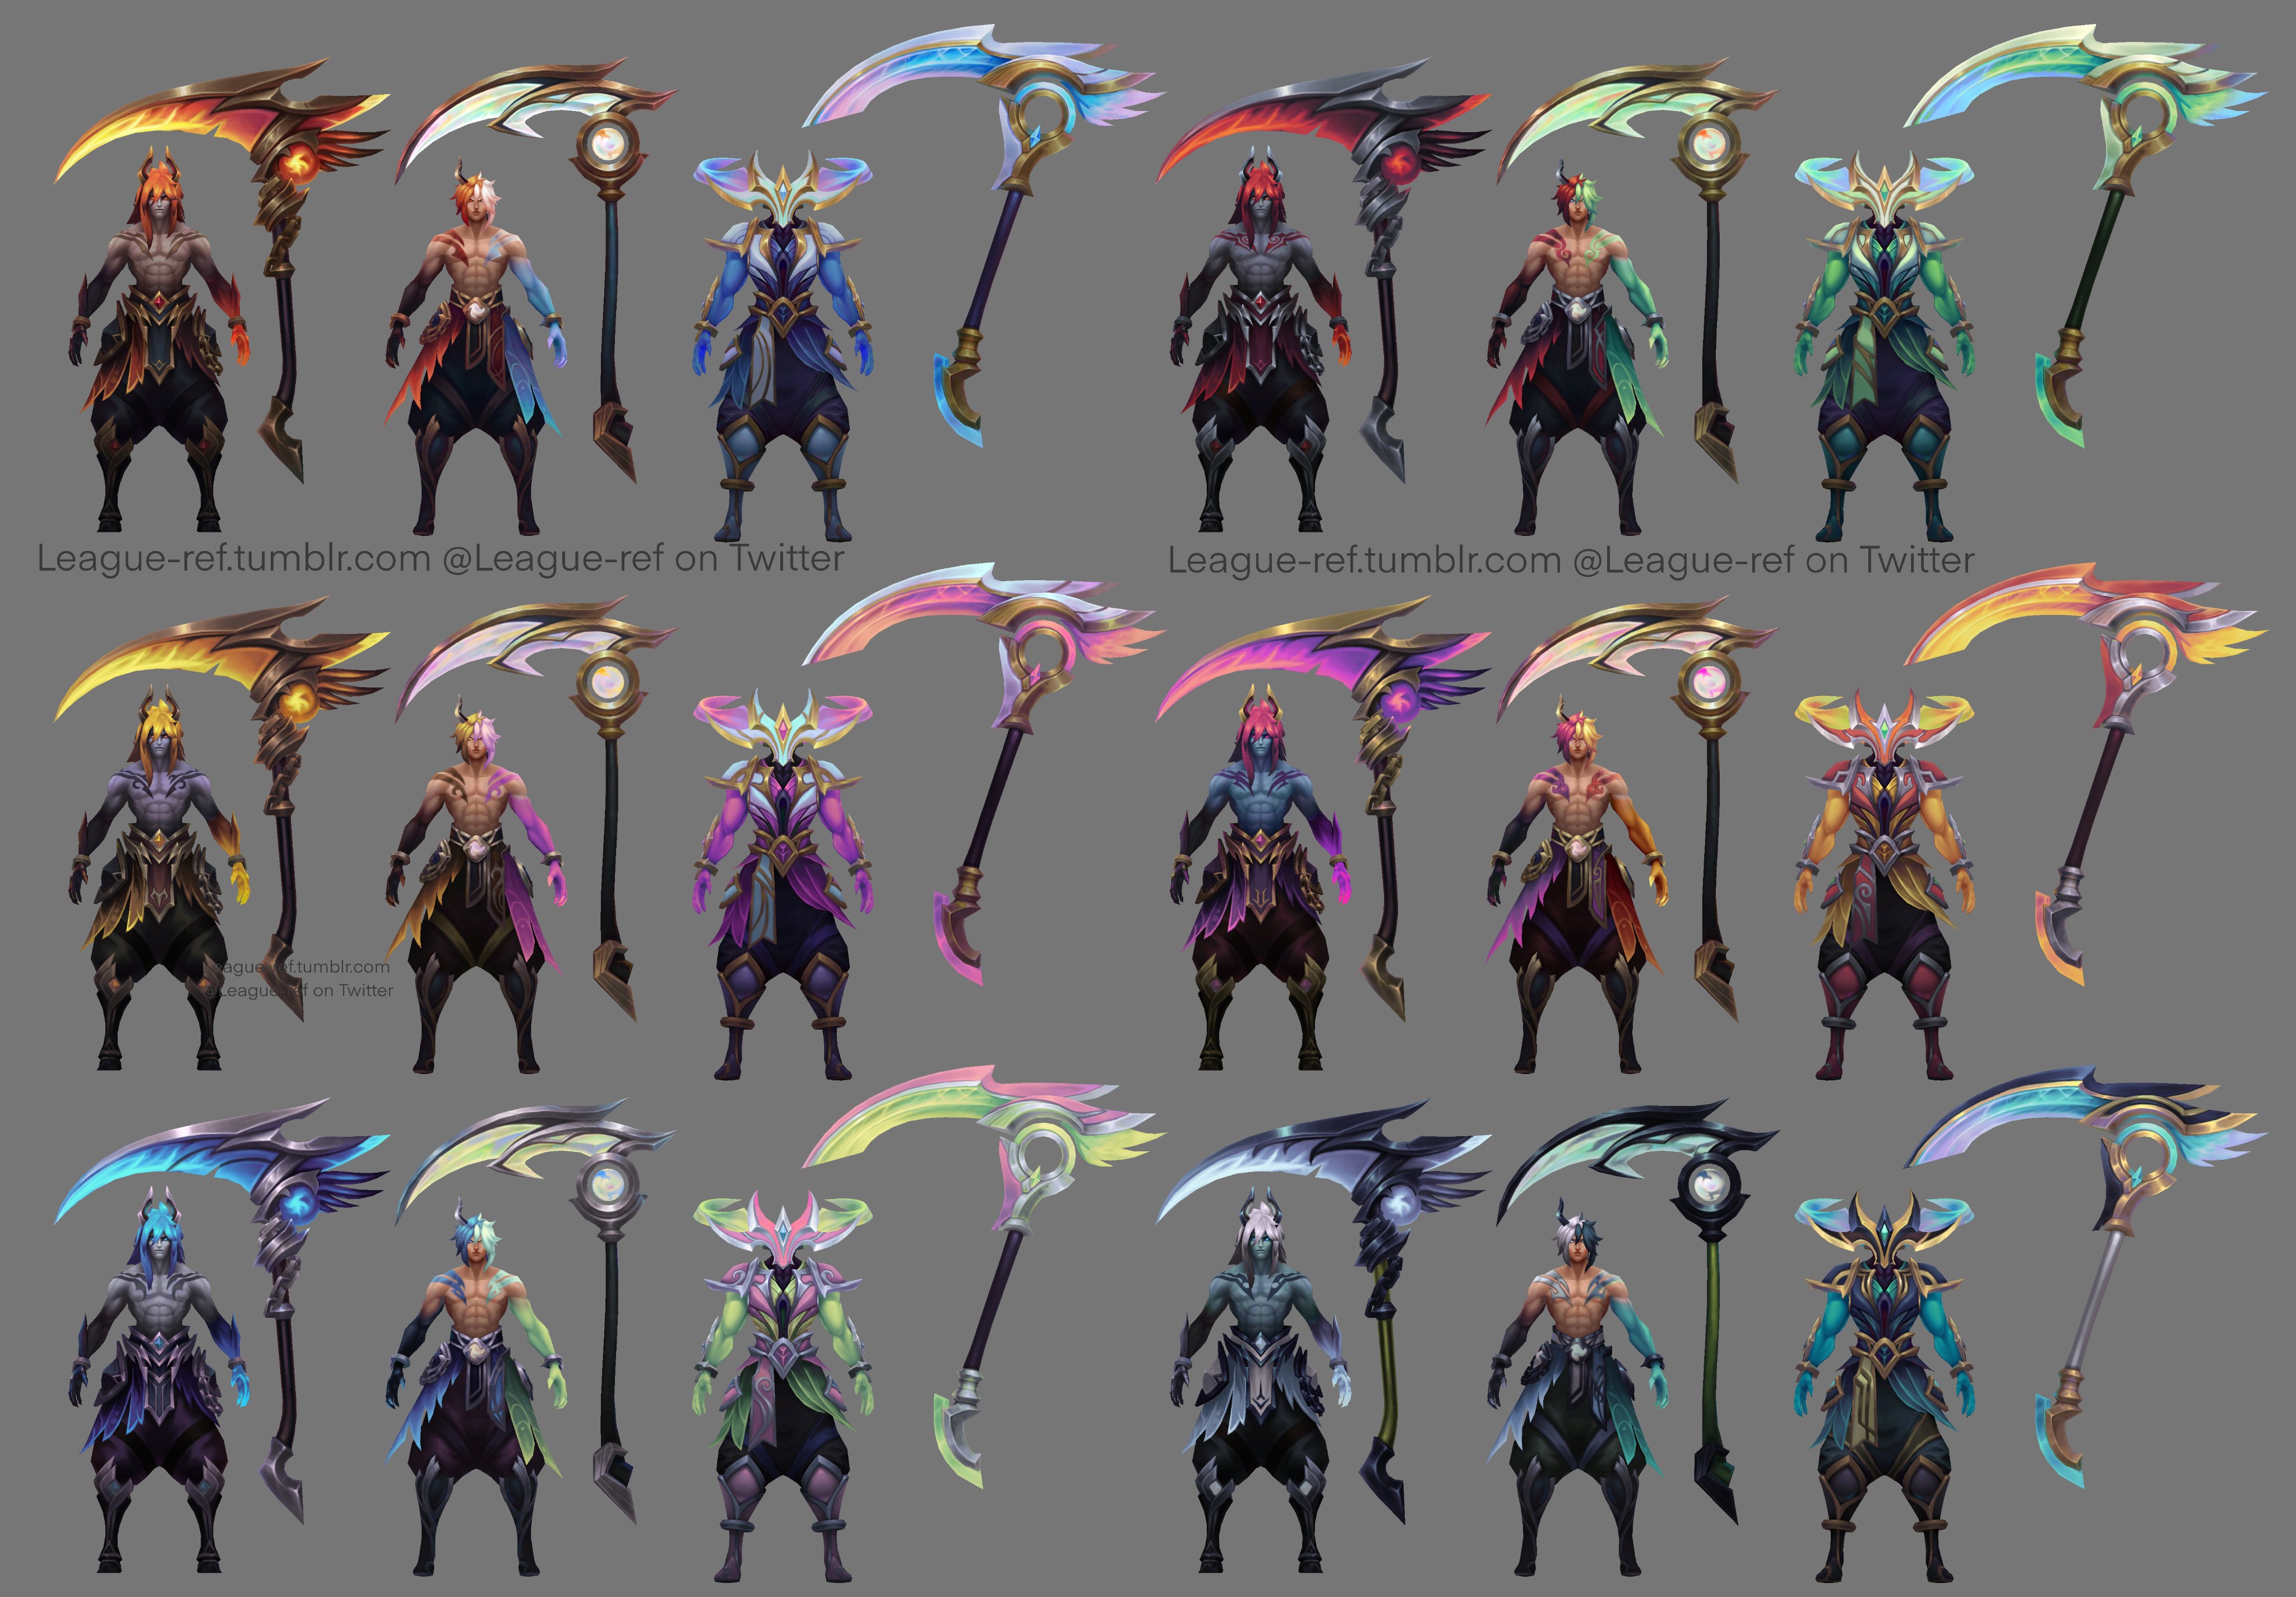 What is the chroma for Nightbringer Yasuo?